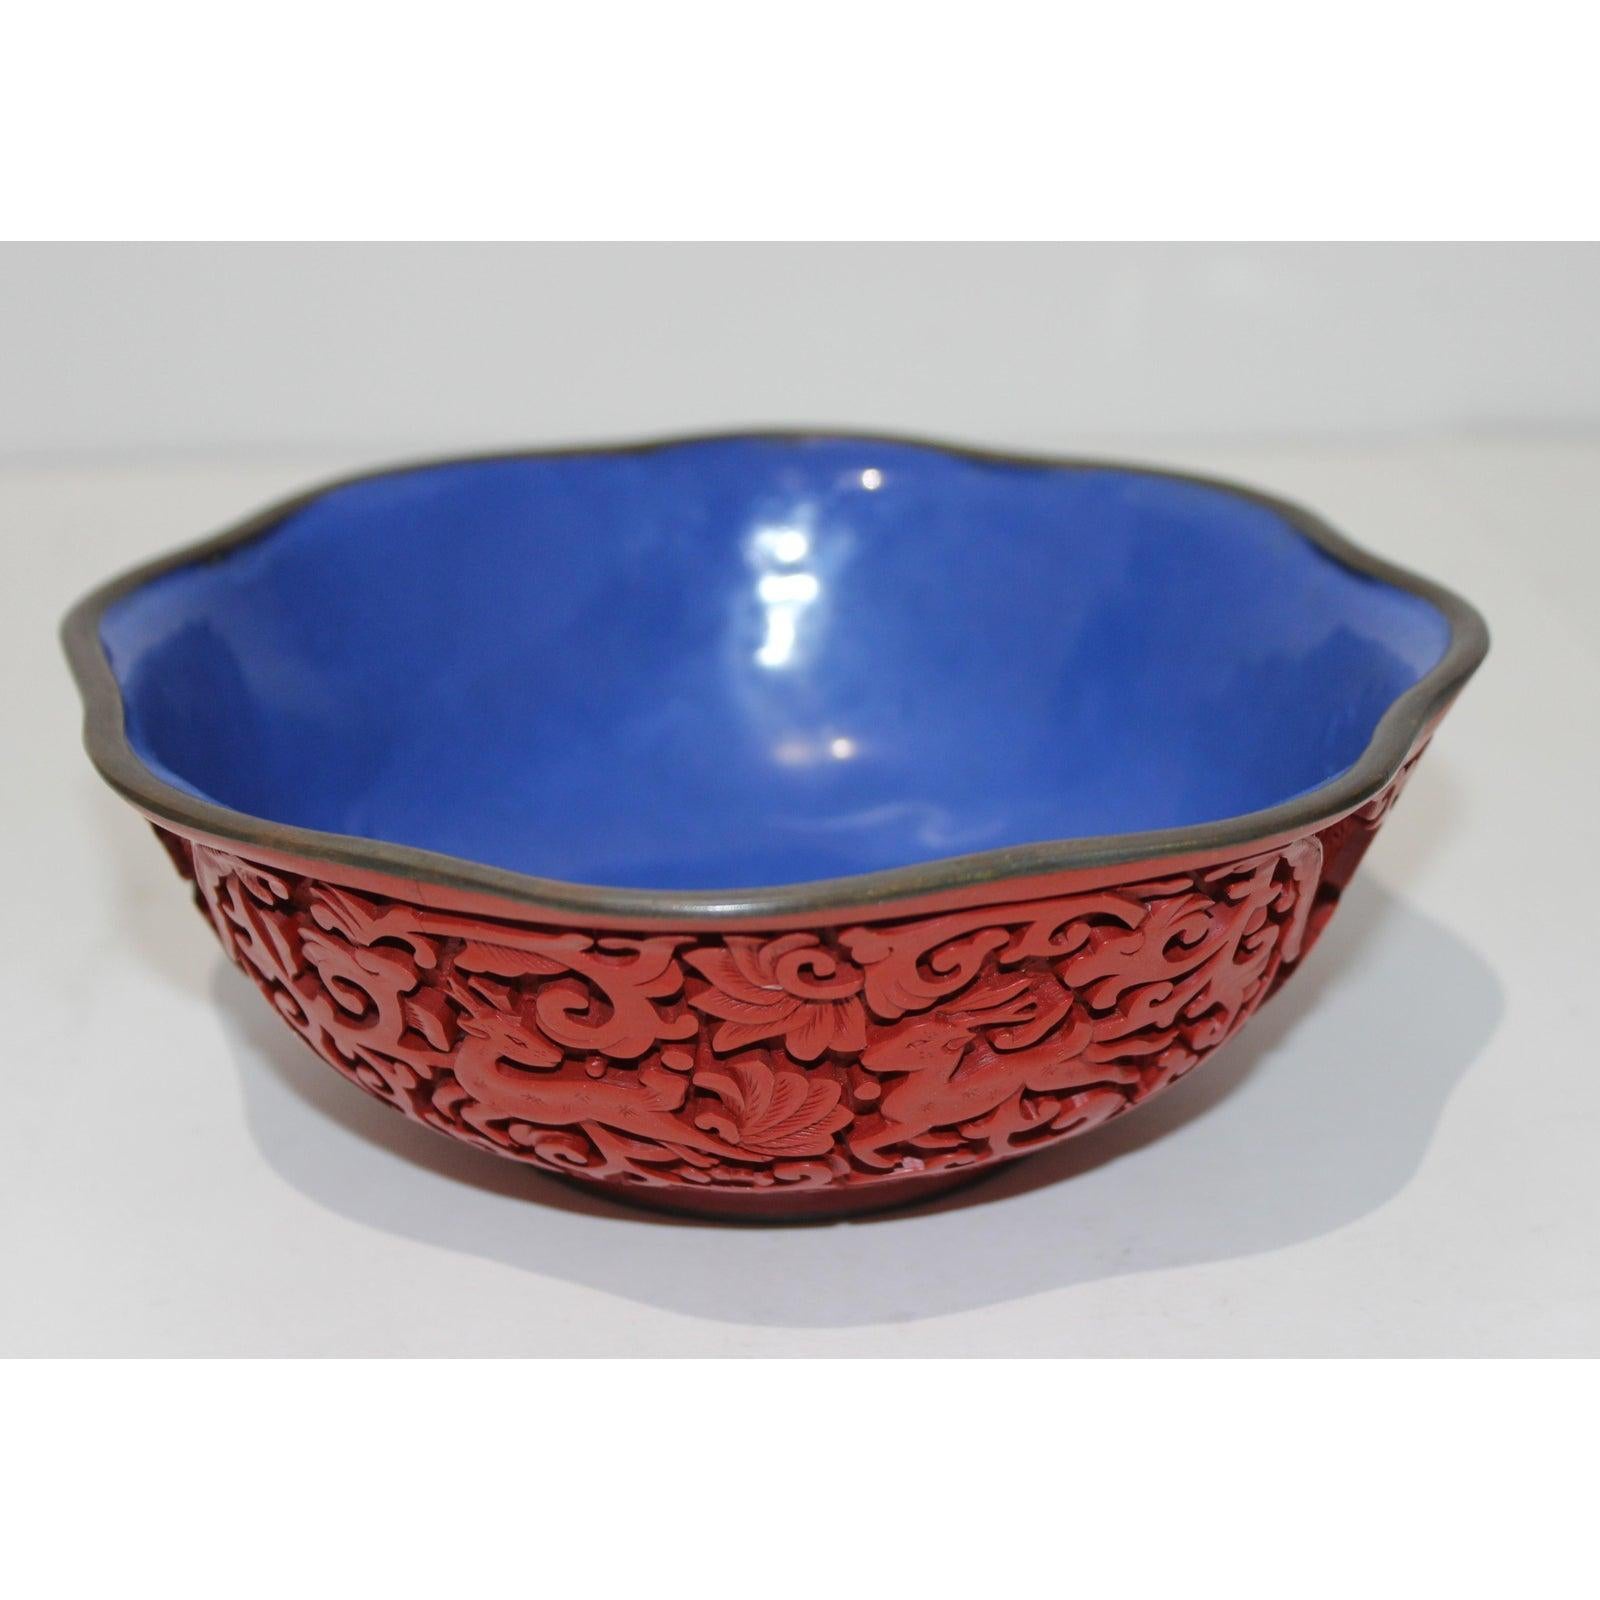 Classic Vintage Chinese Carved Cinnabar lacquer and enameled bowl with deer and chrysanthemum motif from a Palm Beach estate.